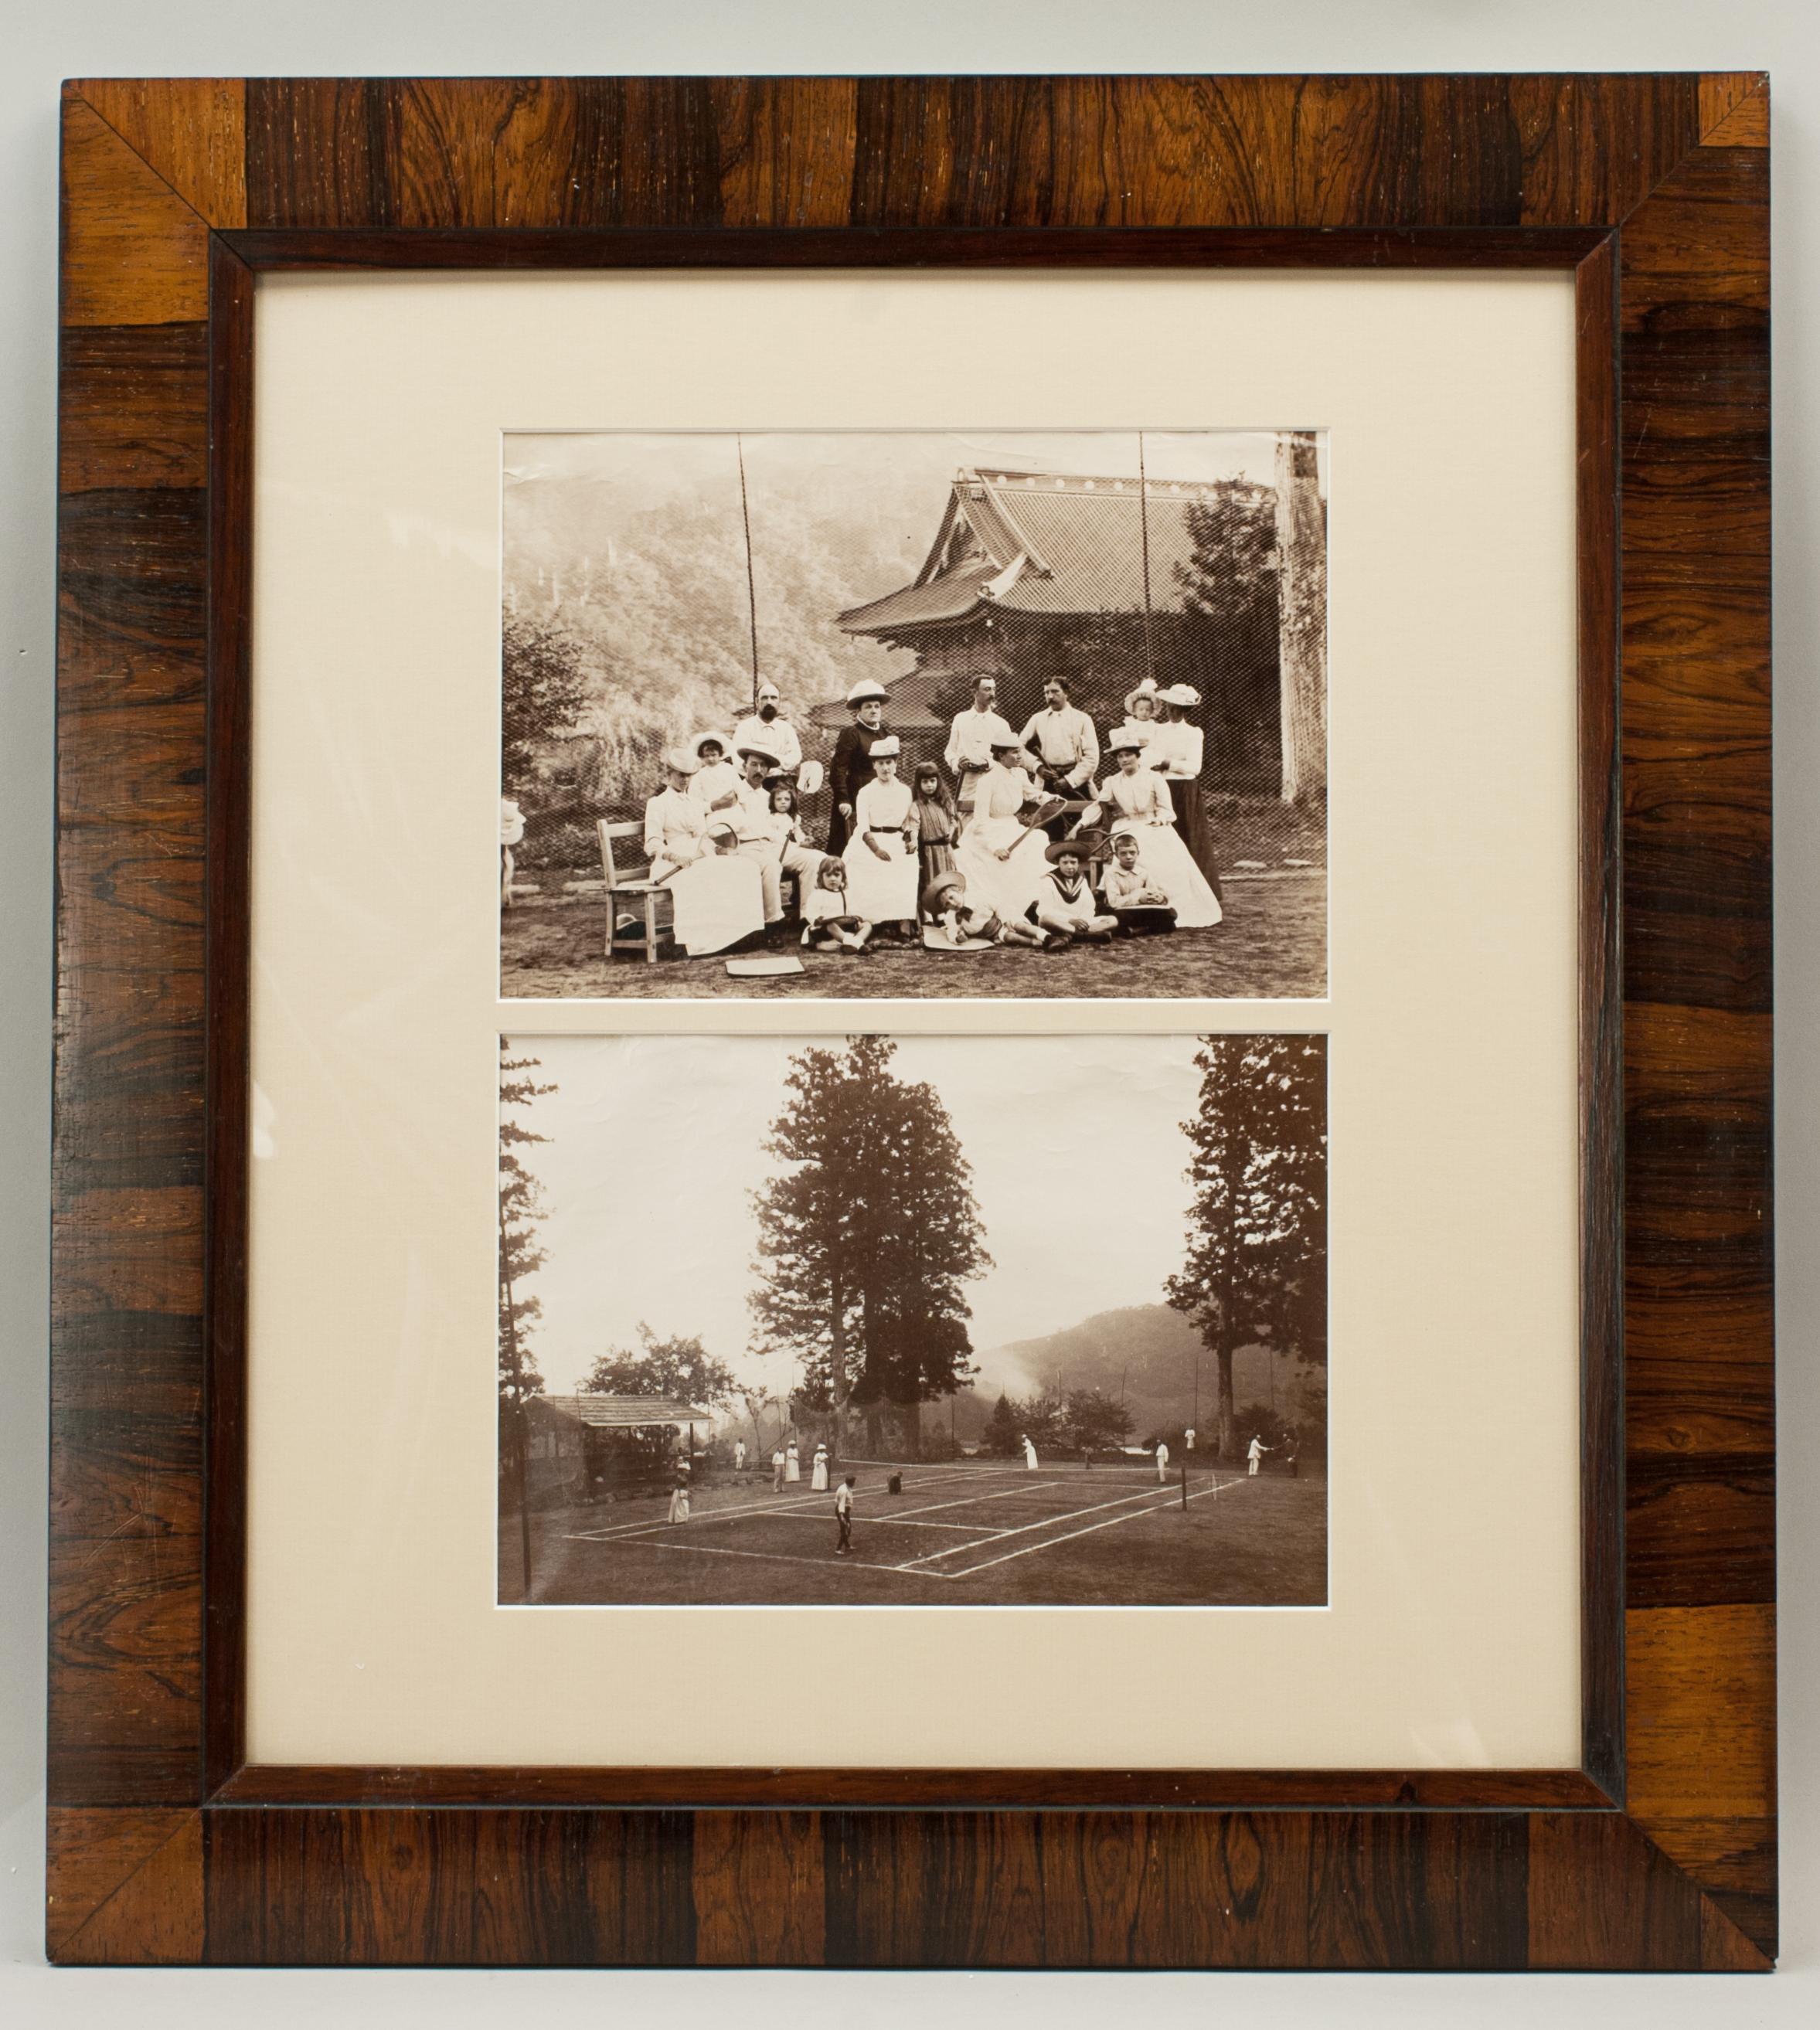 Framed British Colonial Tennis photographs.
A pair of black and white photographs capturing the essence of British Colonial life in the late 19th century. The albumen prints are framed in an antique rosewood frame, one shows group of tennis players